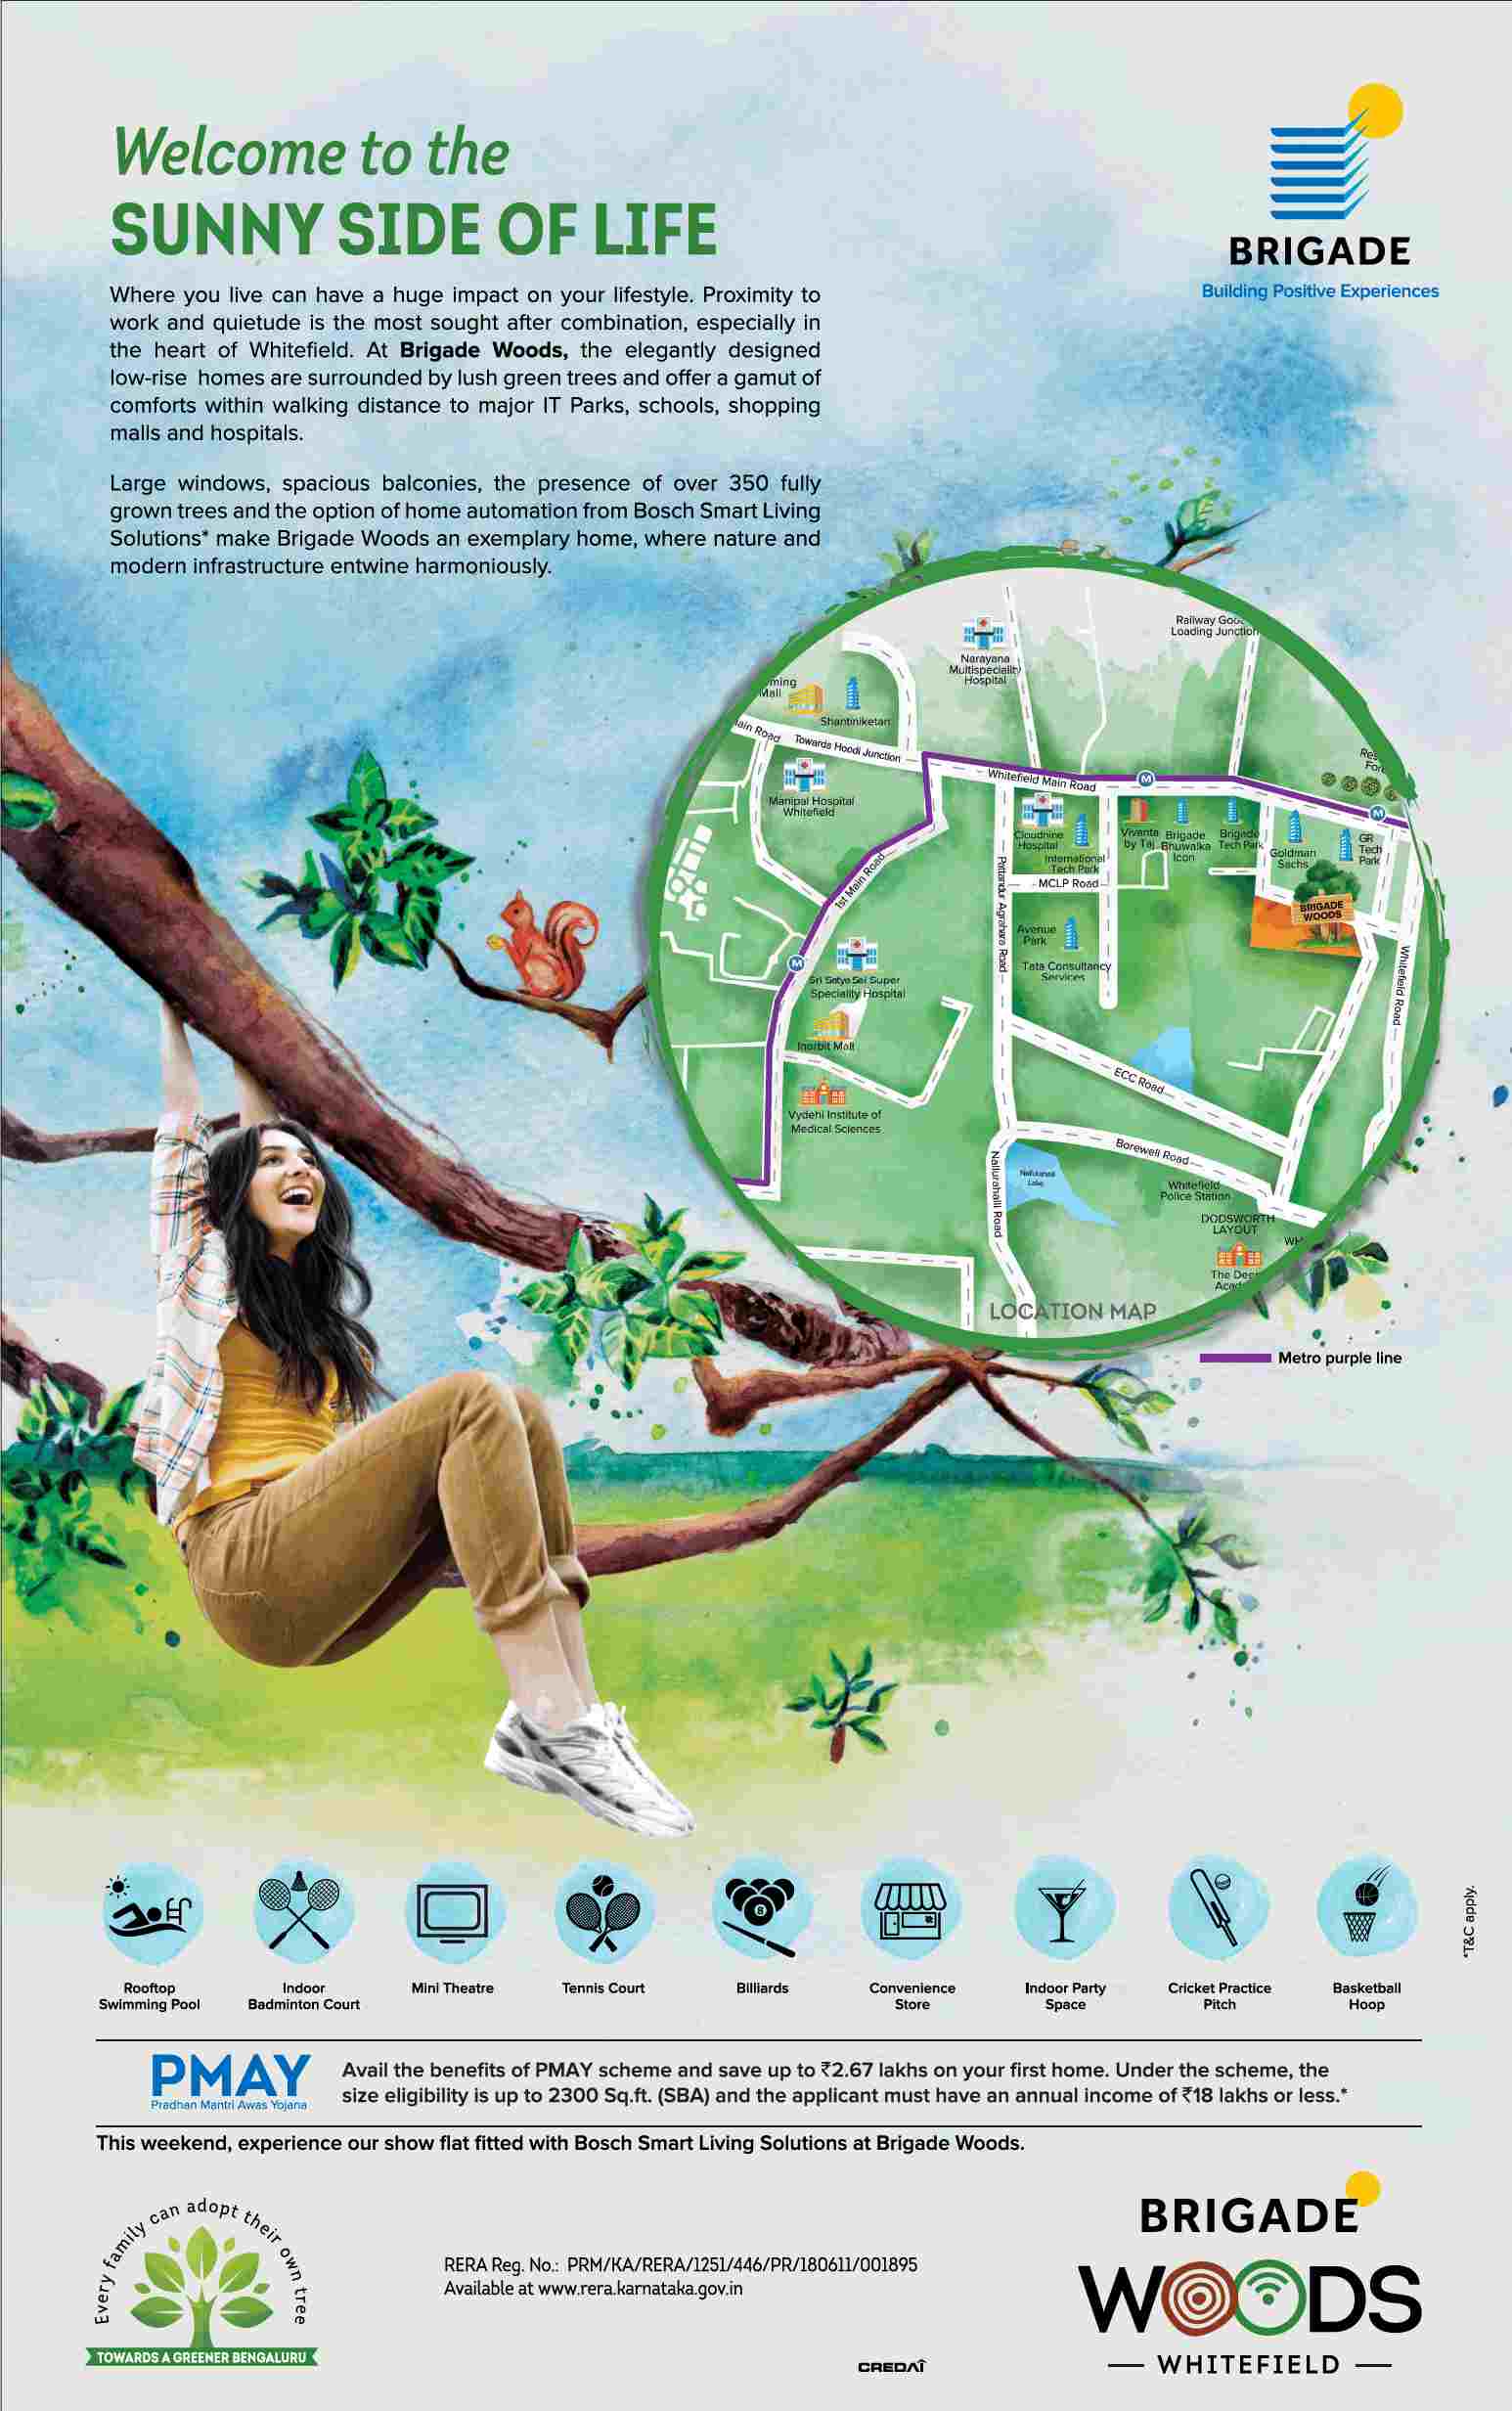 Avail the benefits of PMAY scheme & save up to Rs. 2.67 lakhs at Brigade Woods in Bangalore